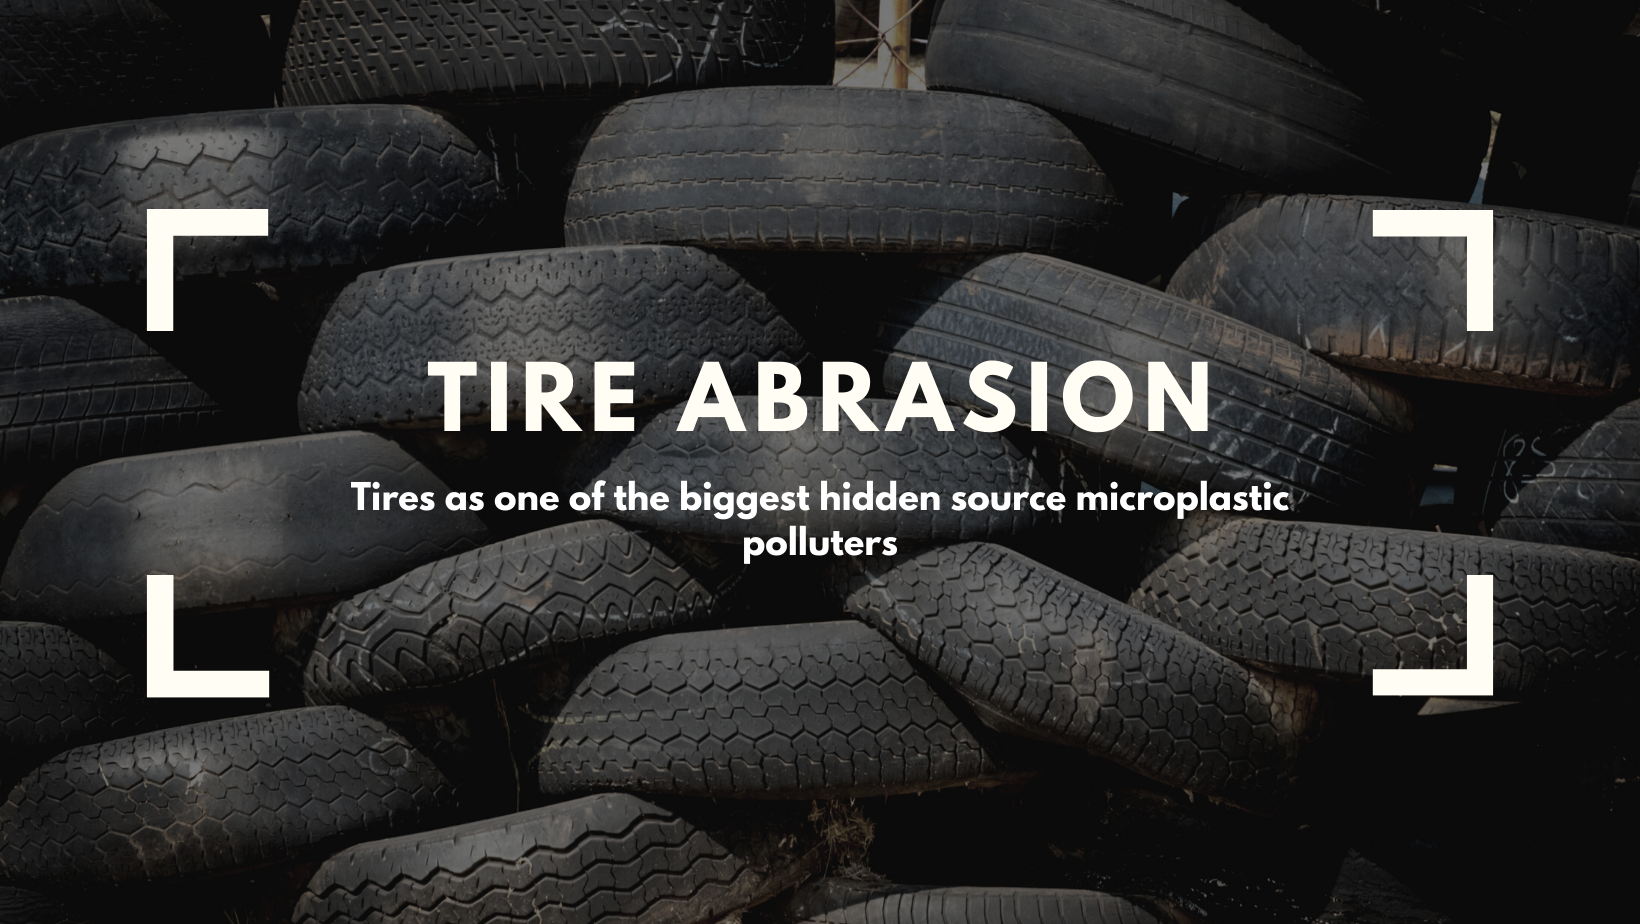 Tires Revealed as Major Contributors to Microplastic Pollution